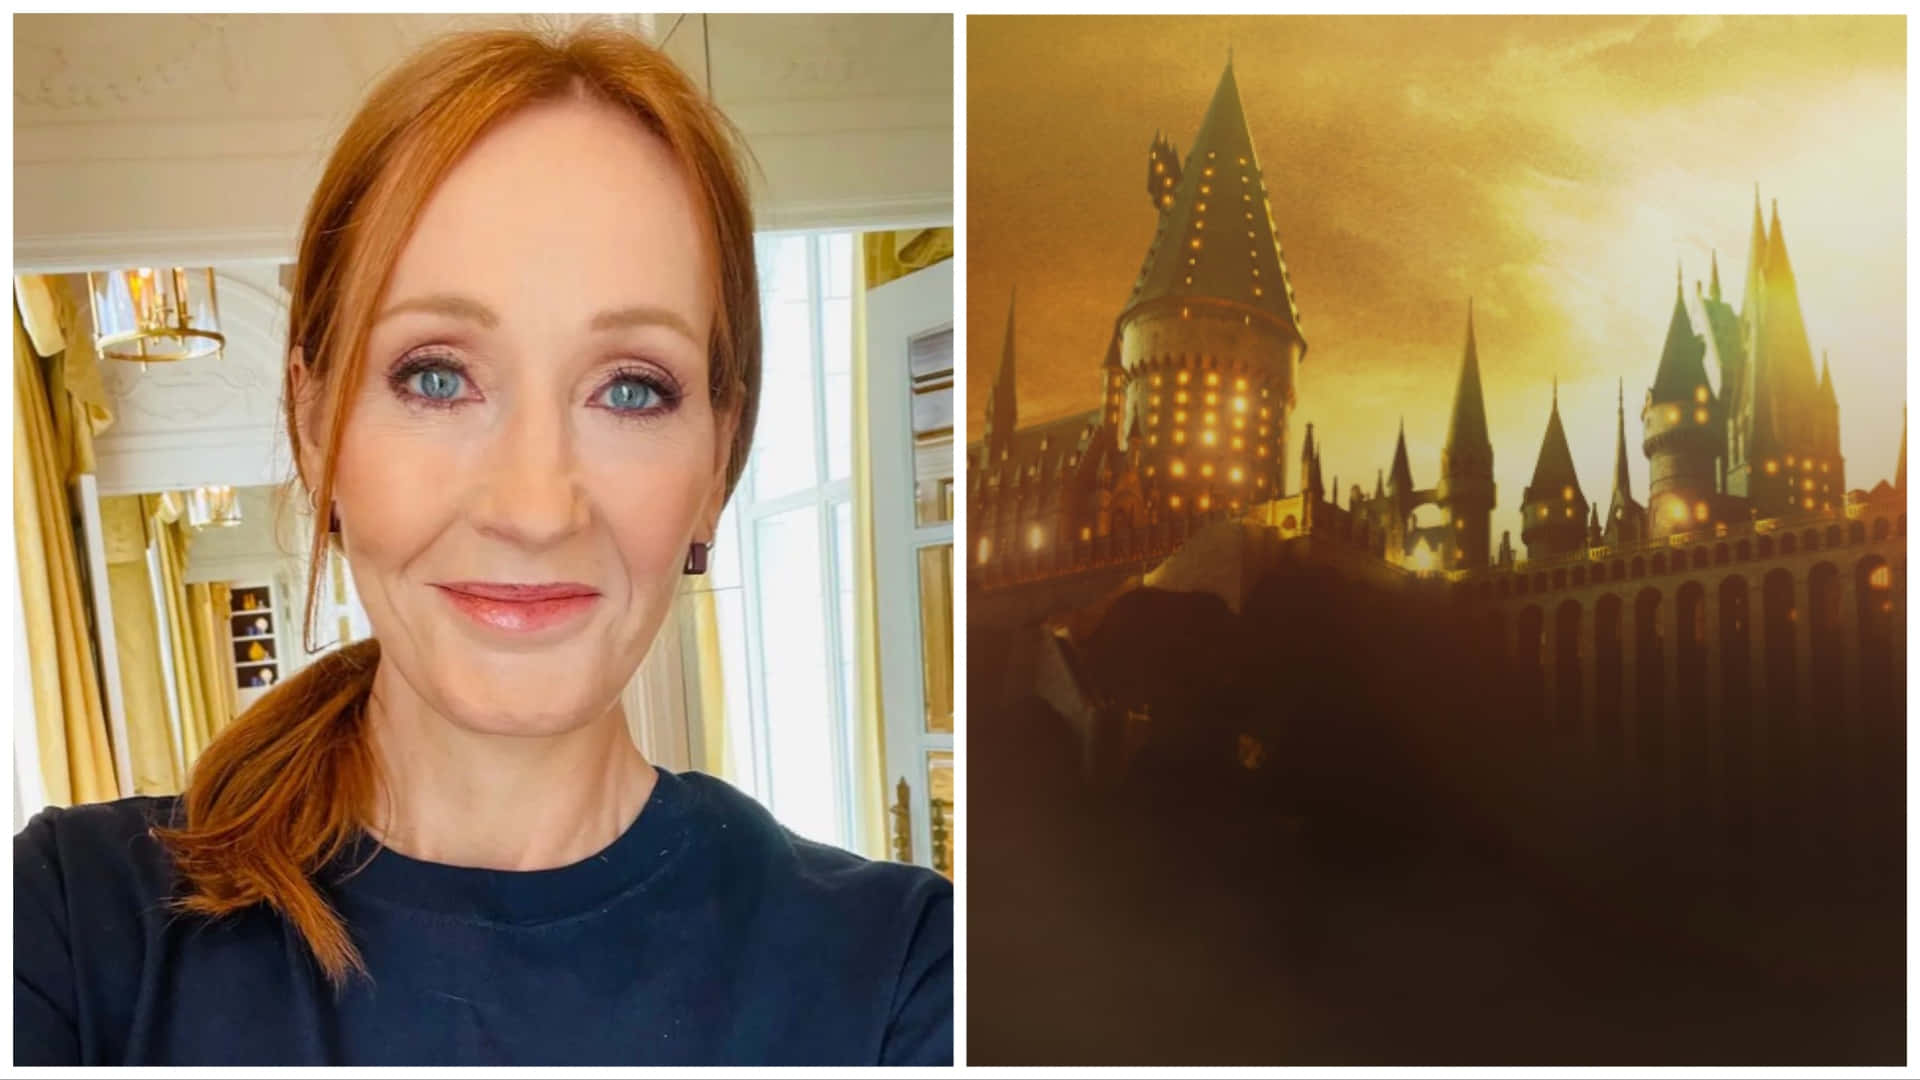 J K Rowling, the world-renowned author, at Life in Pictures event Wallpaper